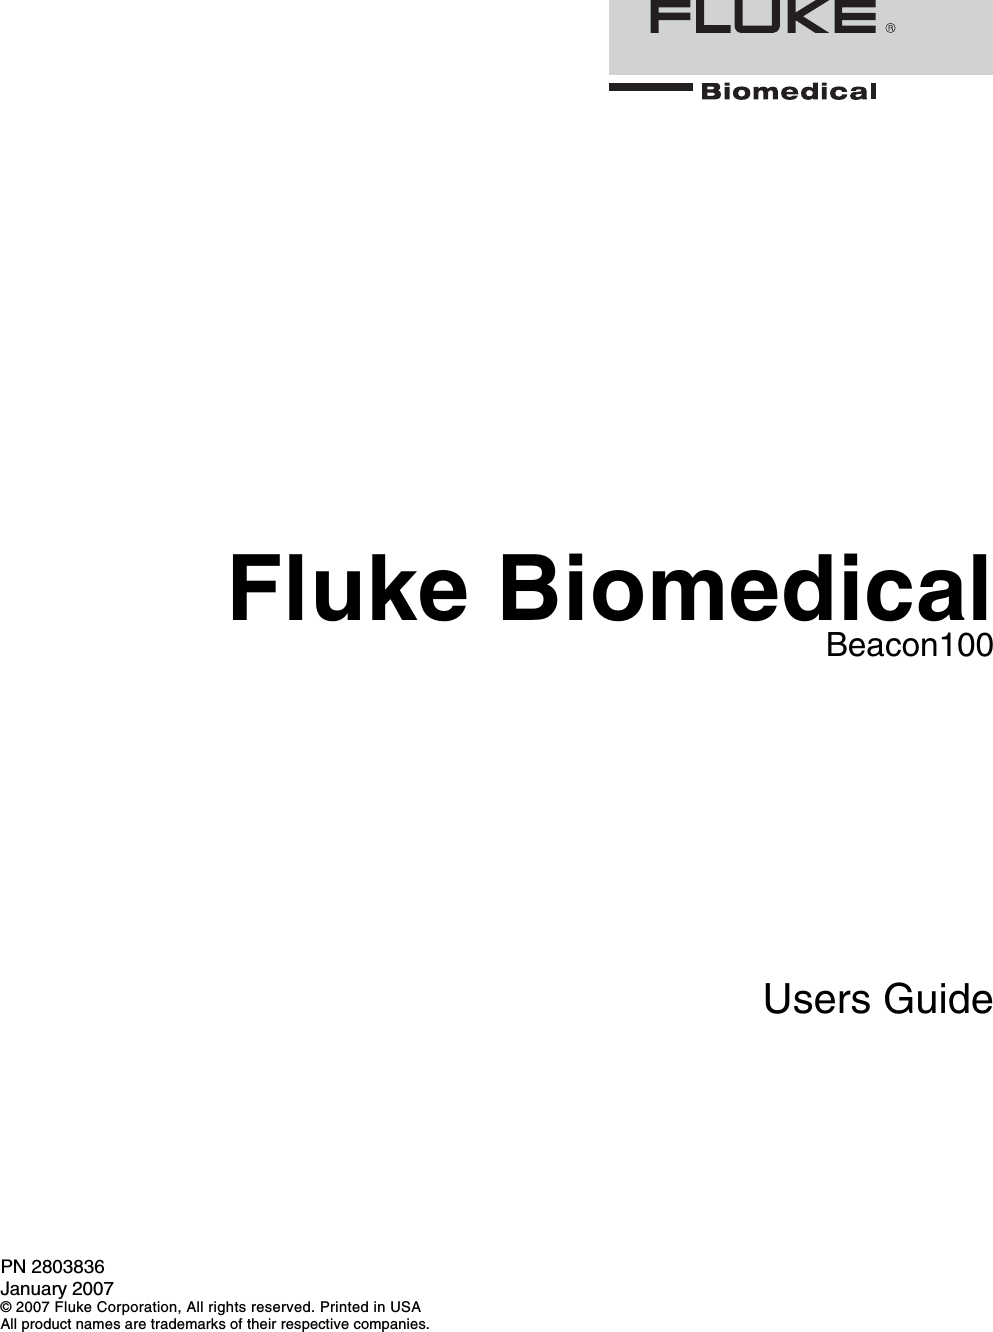     Fluke Biomedical Beacon100  Users Guide  PN 2803836 January 2007 © 2007 Fluke Corporation, All rights reserved. Printed in USA All product names are trademarks of their respective companies. 